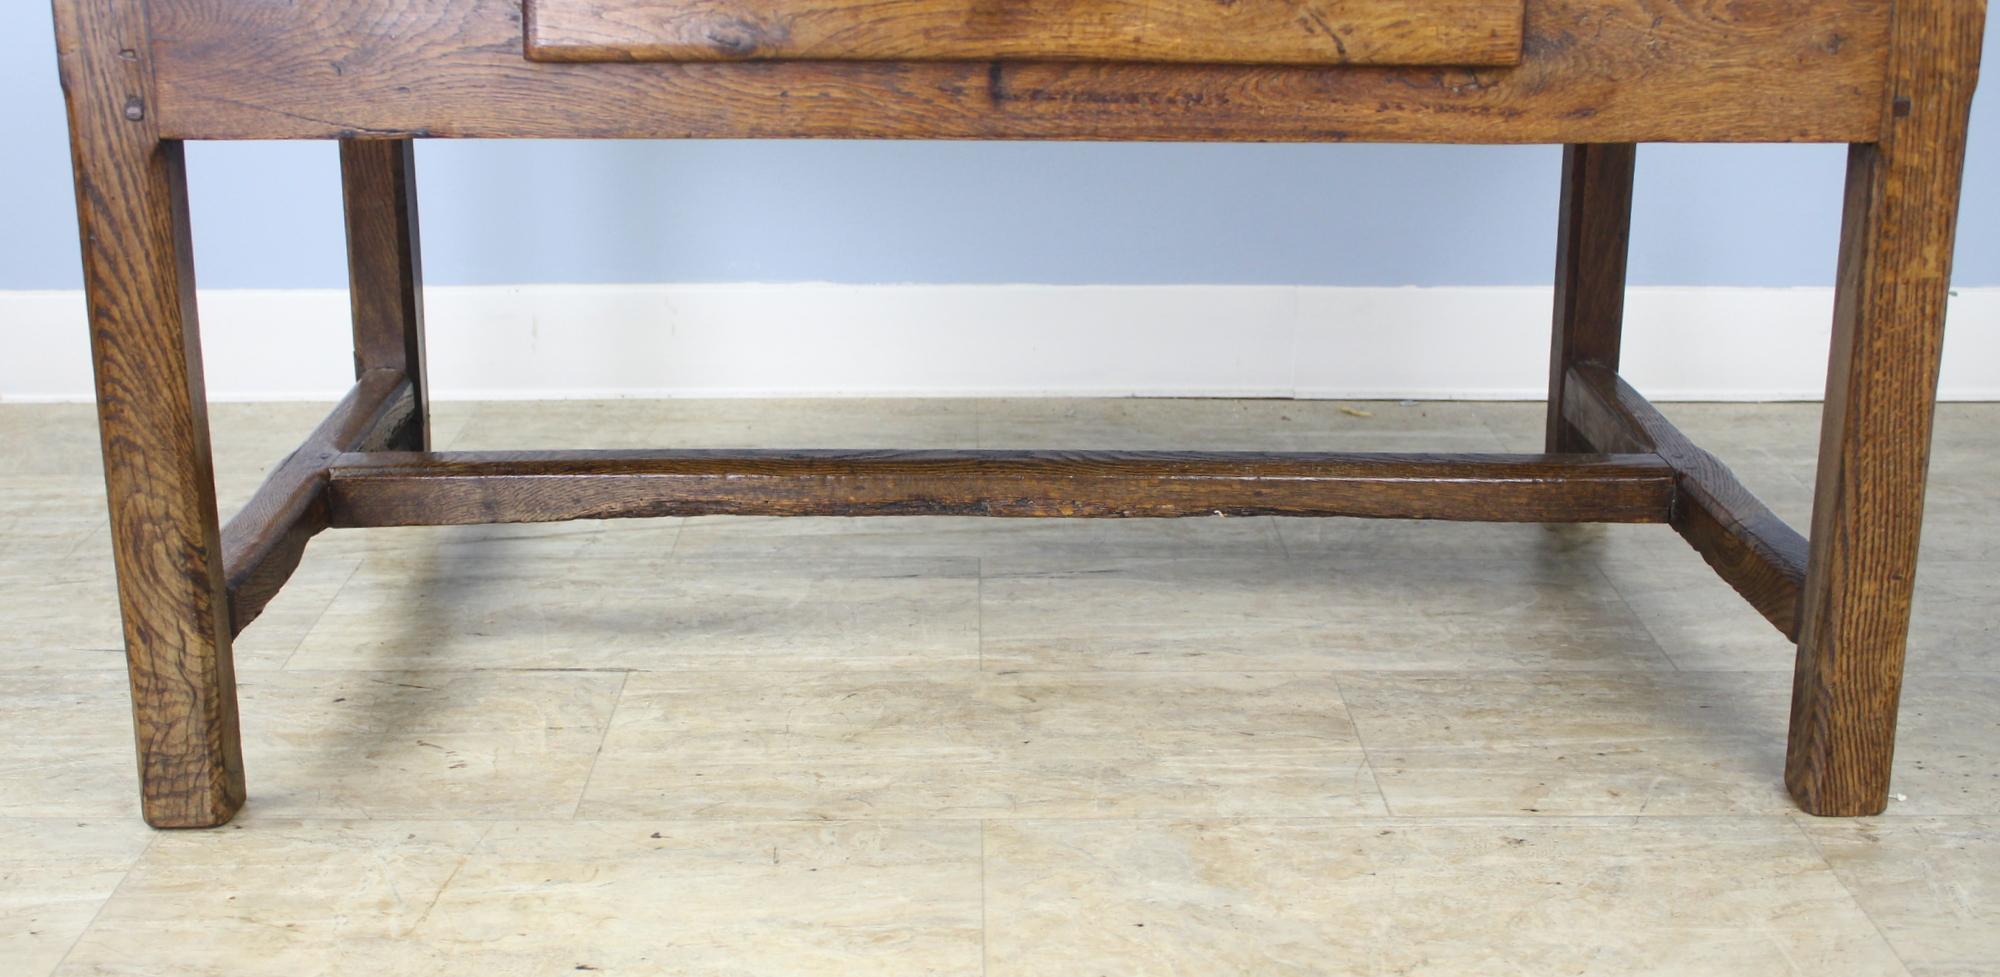 Early 19th Century Antique Oak Trestle Based Coffee Table